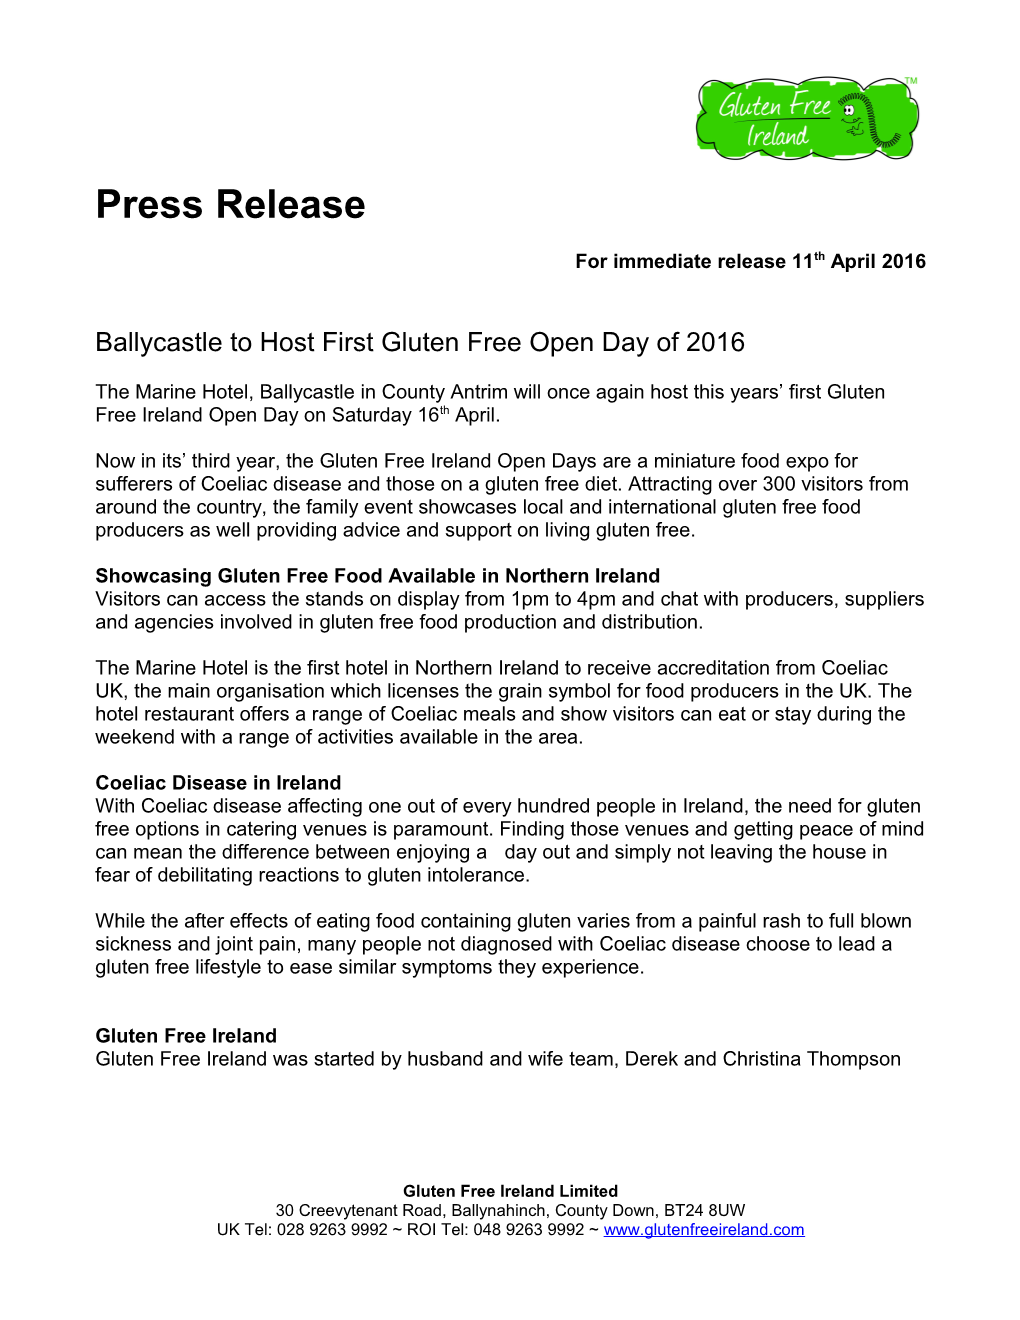 Ballycastle to Host First Gluten Free Open Day of 2016